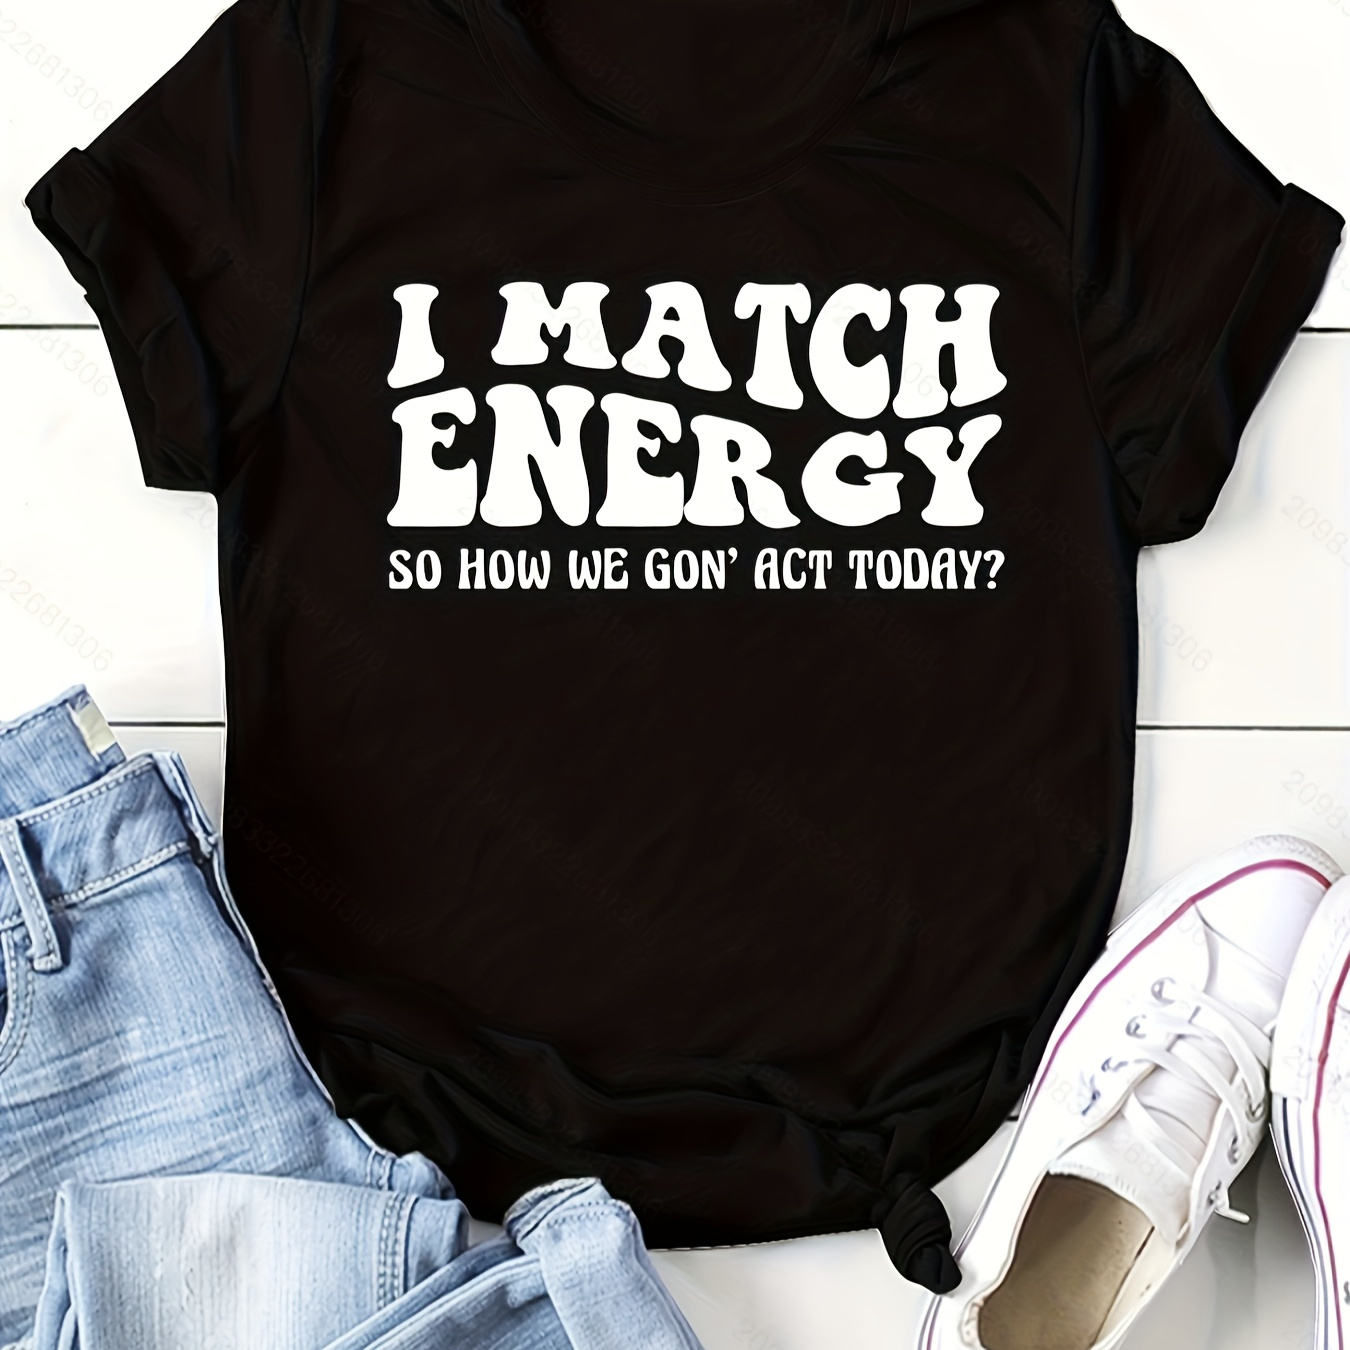 

I Match Energy Print T-shirt, Casual Crew Neck Short Sleeve T-shirt For Spring & Summer, Women's Clothing